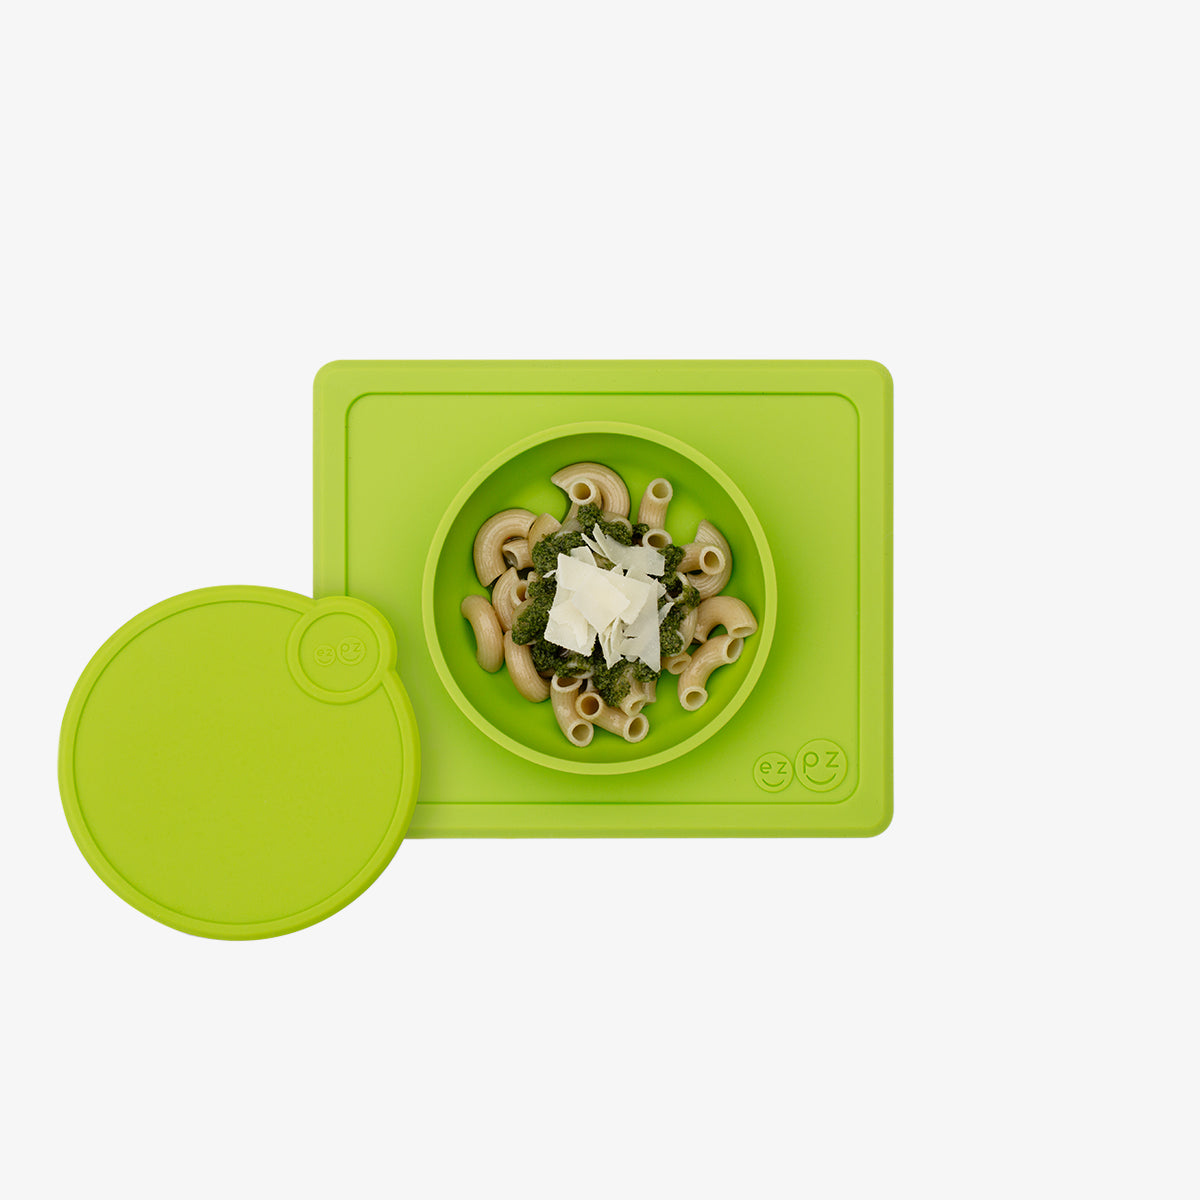 Mini Bowl Lid in Lime by ezpz / The Original All-In-One Silicone Plates & Placemats that Stick to the Table